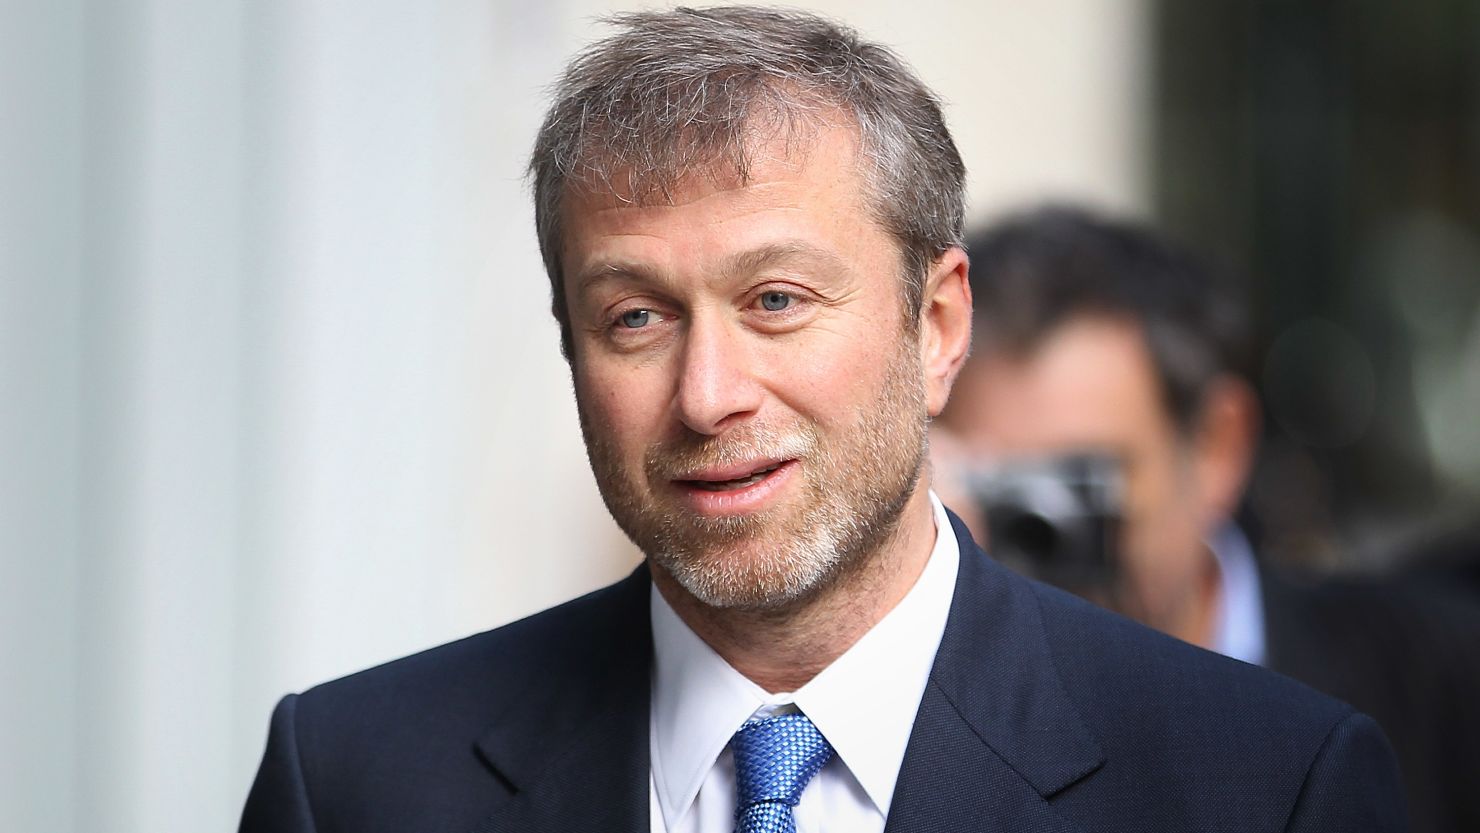 Chelsea owner Roman Abramovic was widely criticized for his decision to sack manager Andre Villas-Boas. 